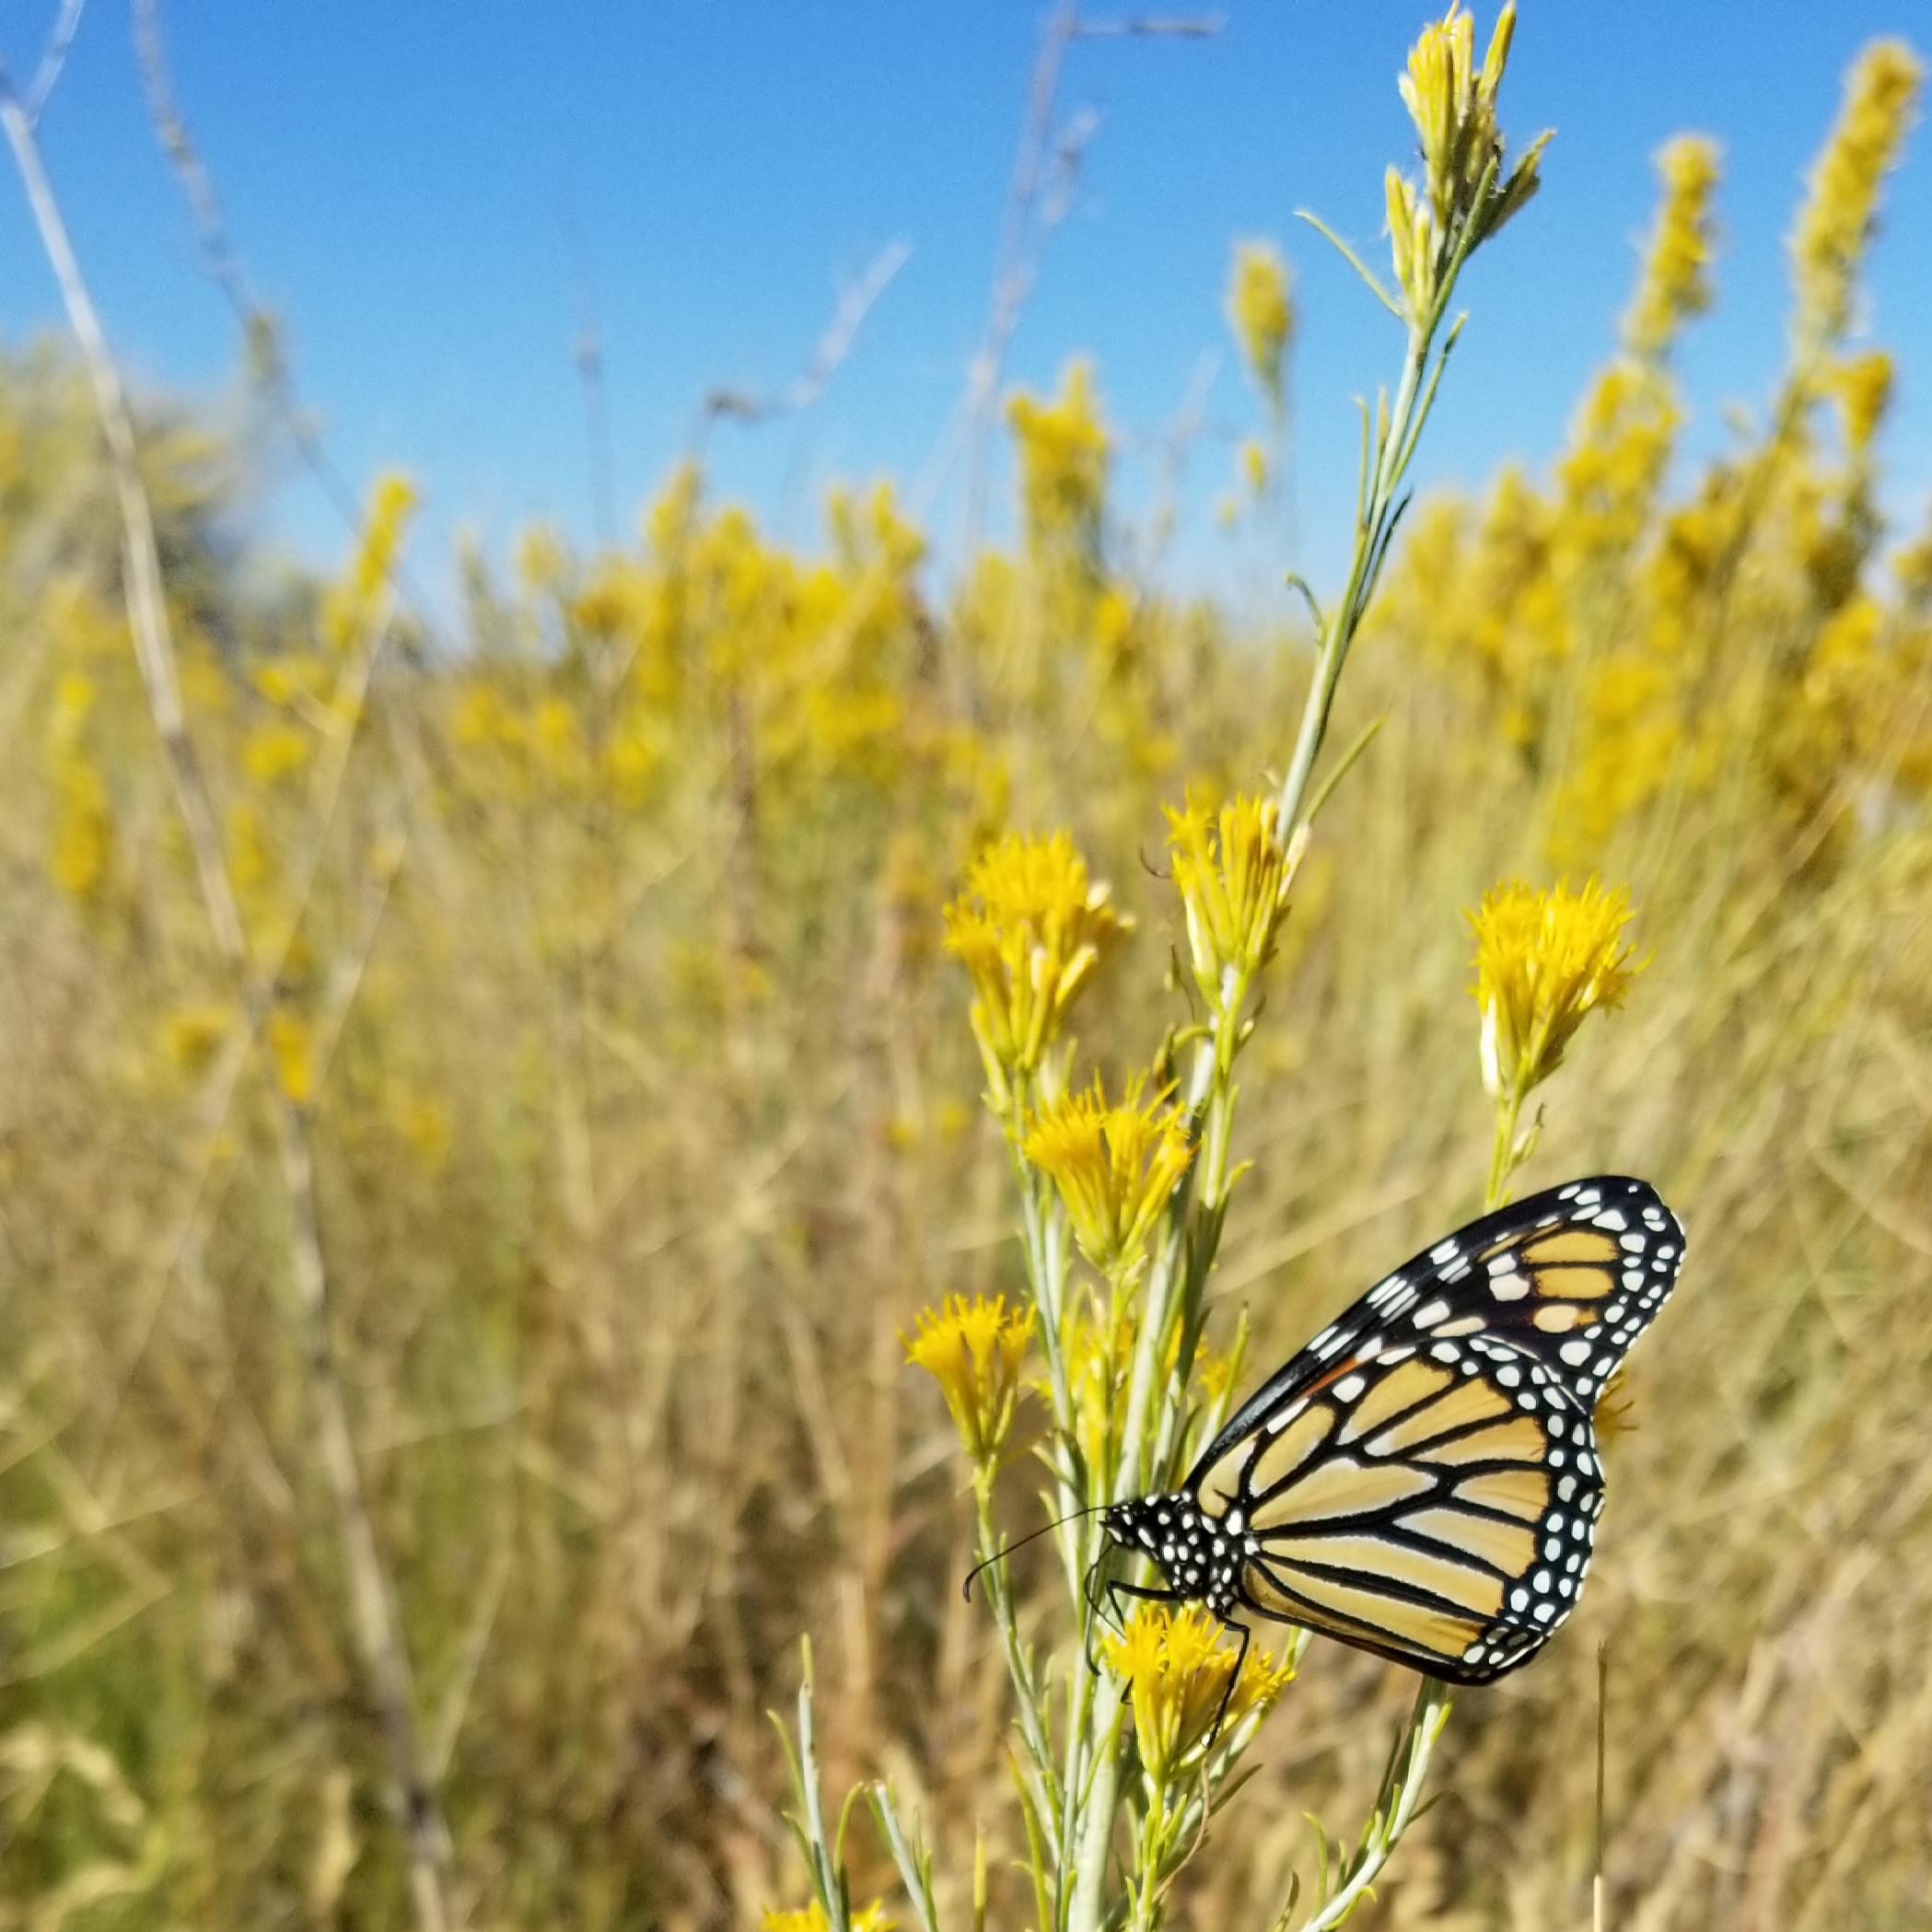 In an arid landscape with dry, brownish-yellow grass, a monarch clings to a stalk of rabbitbrush, with a dry-looking stem and yellow flowers.